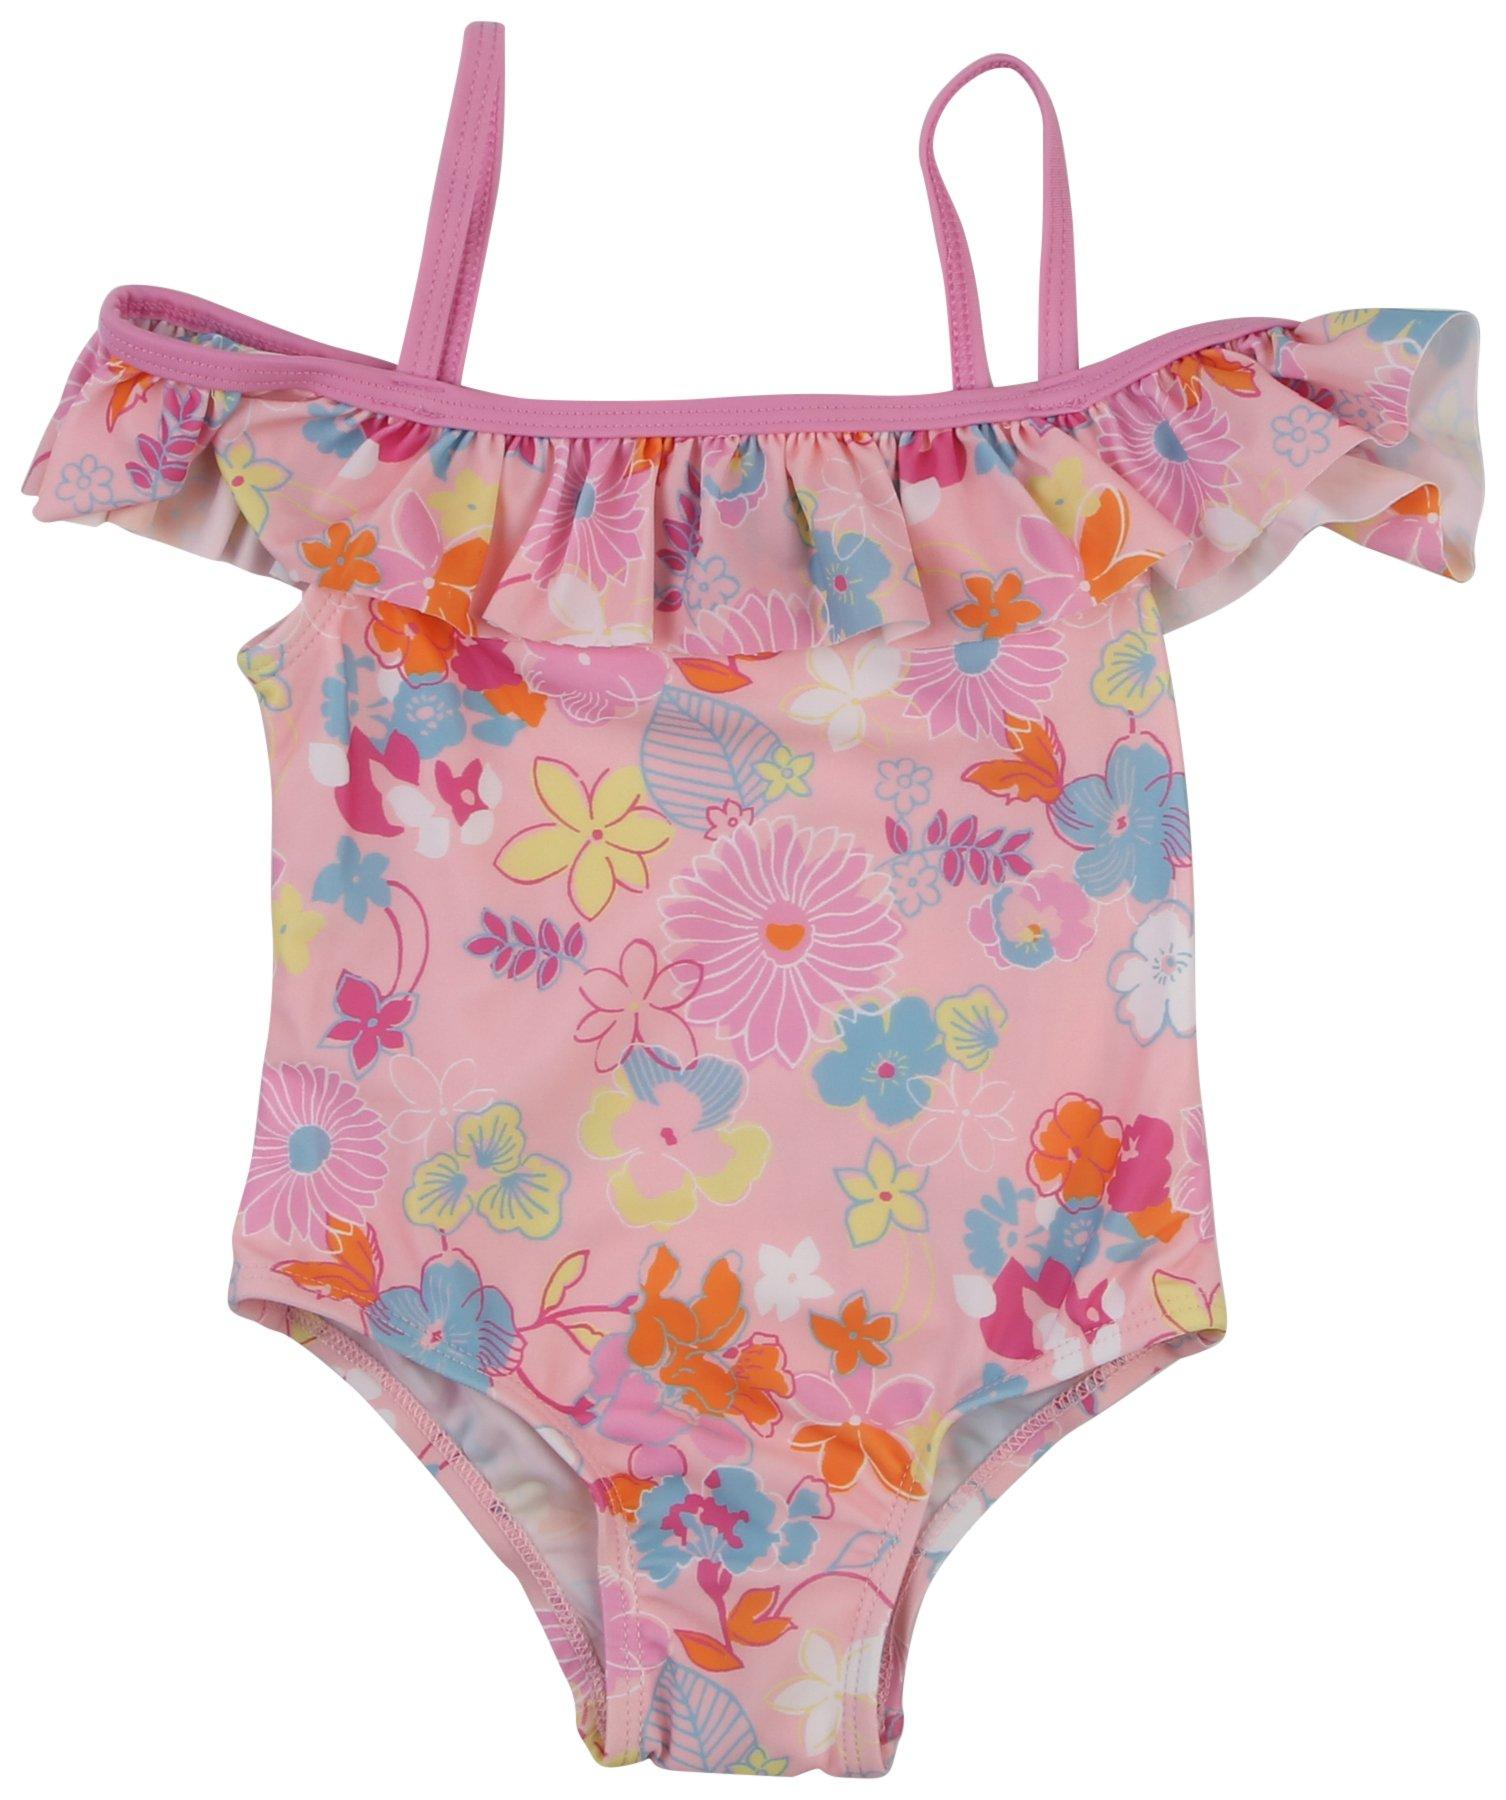 Toddler Girls One Pc Pink Floral Swimsuit